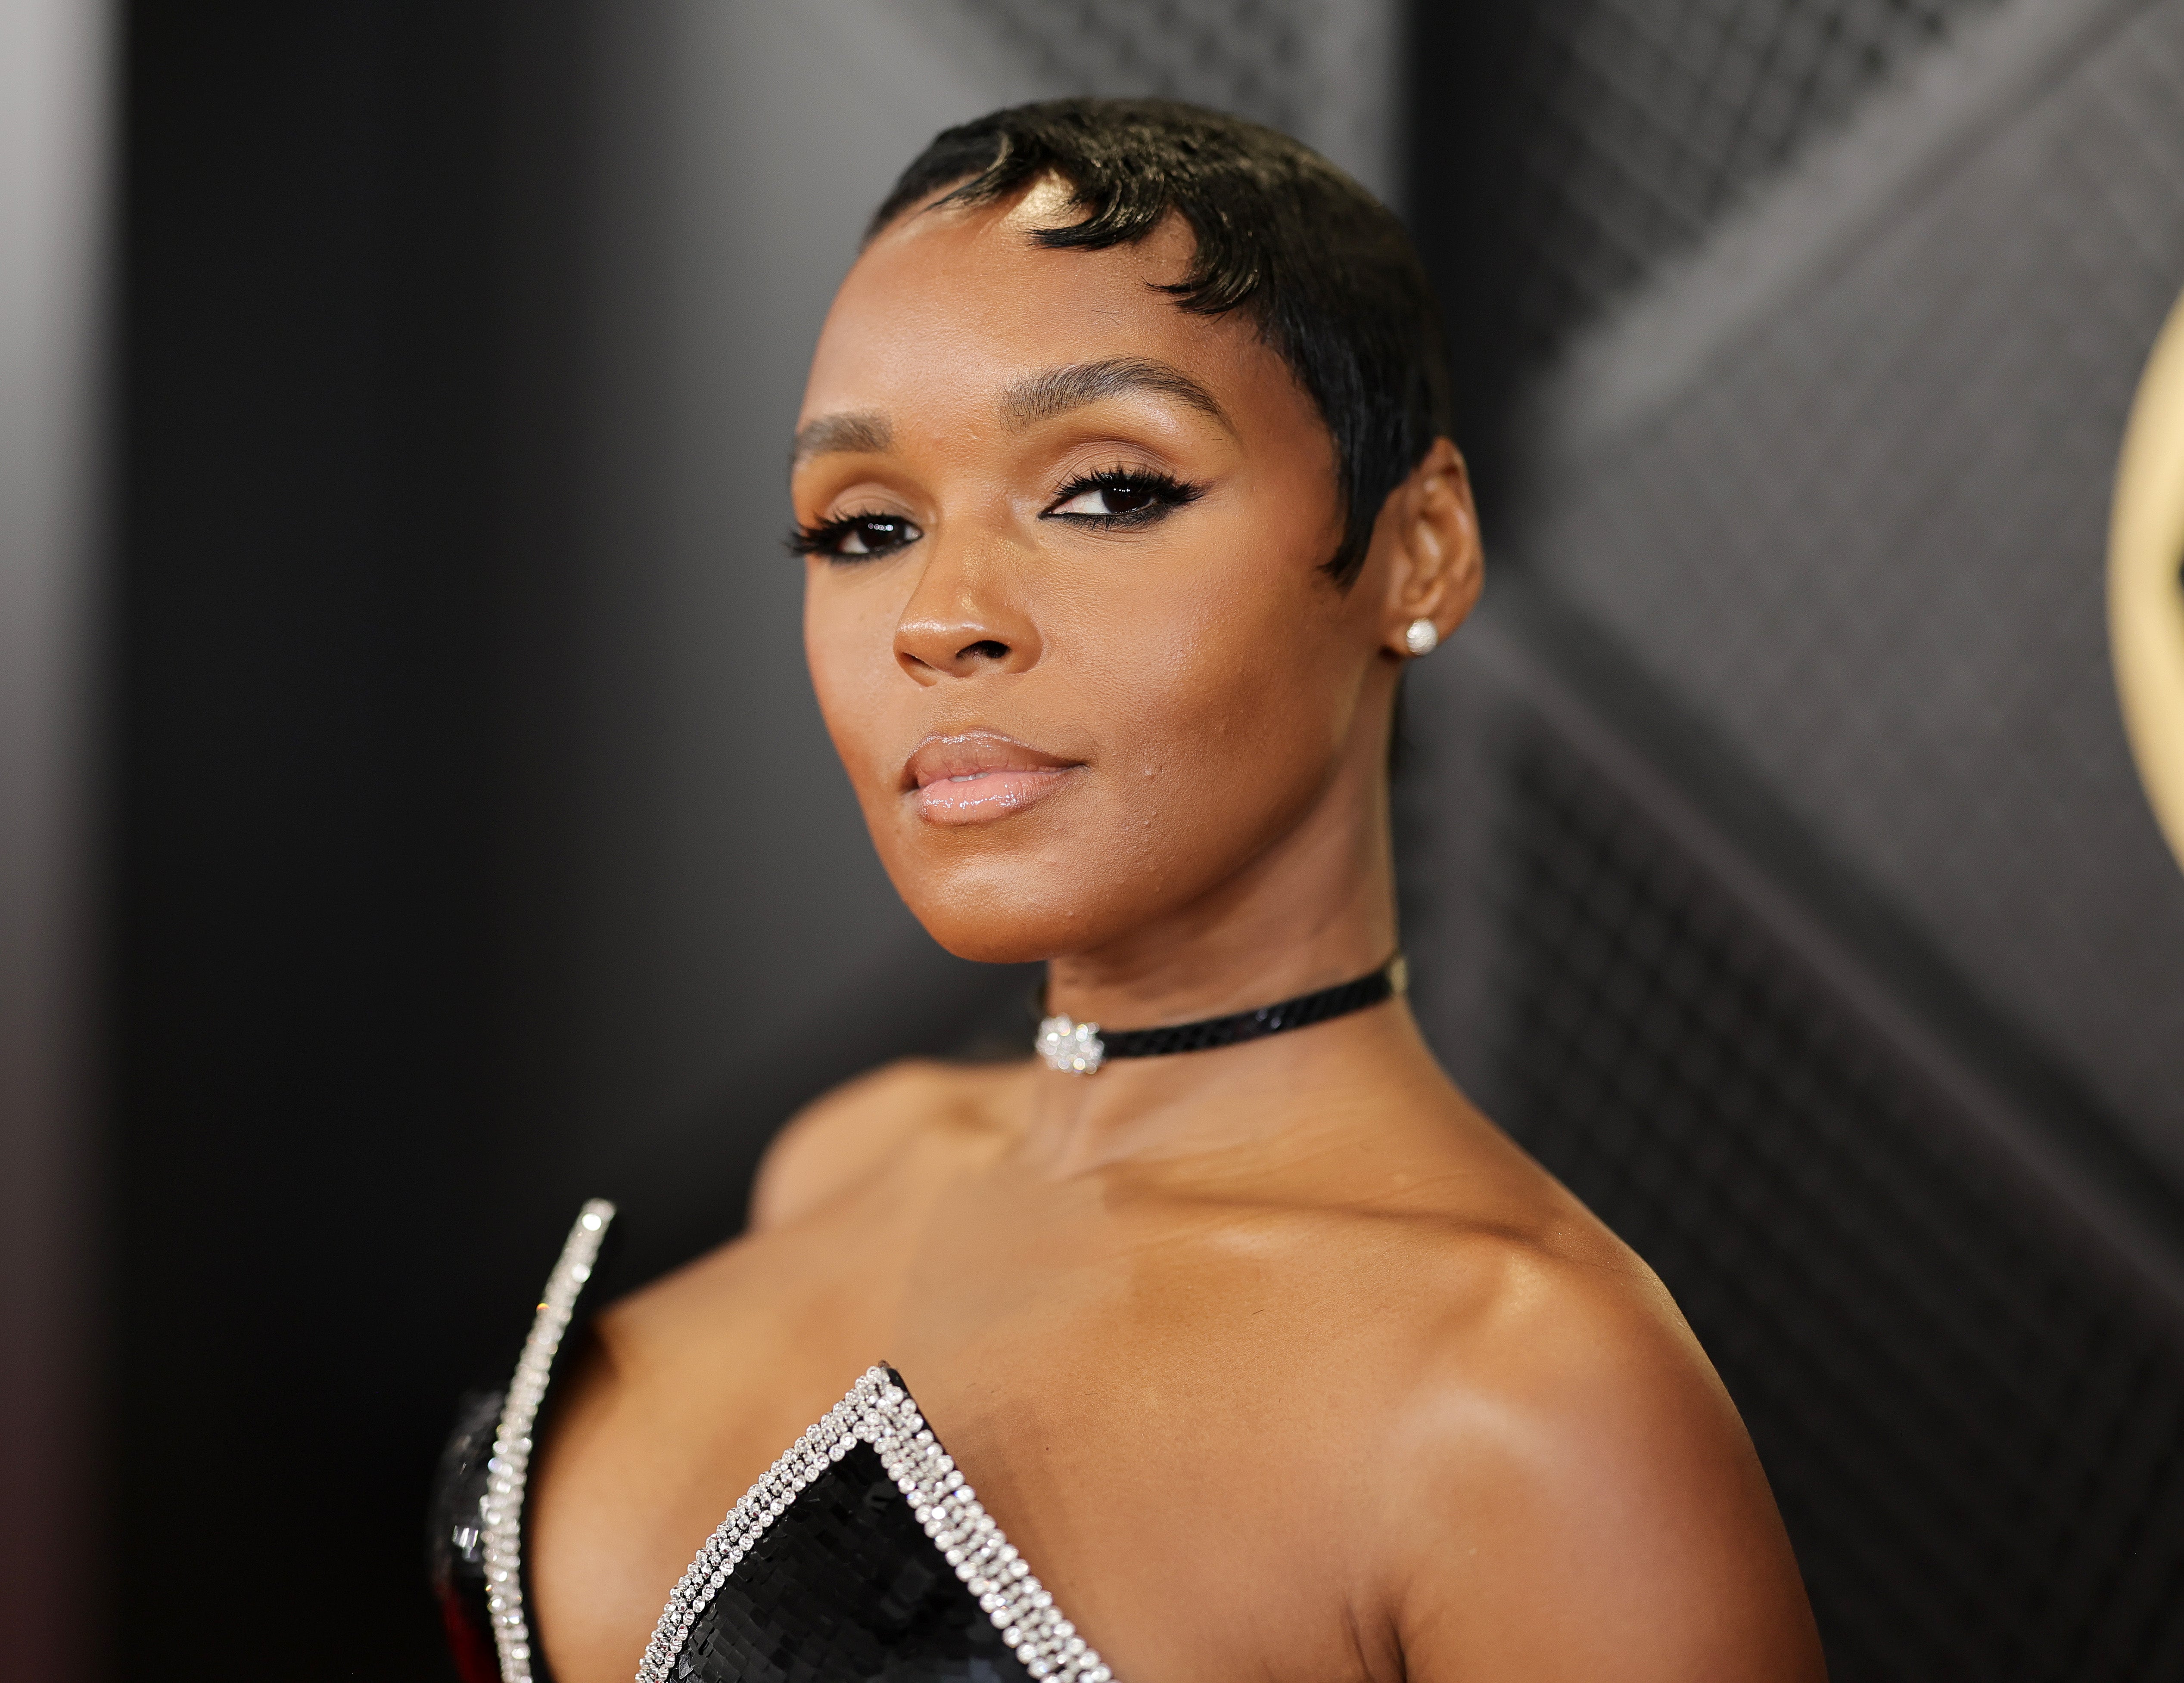 Janelle Monáe said her ‘underarm hairs definitely tingled’ when she read the ‘Glass Onion: A Knives Out Mystery’ script